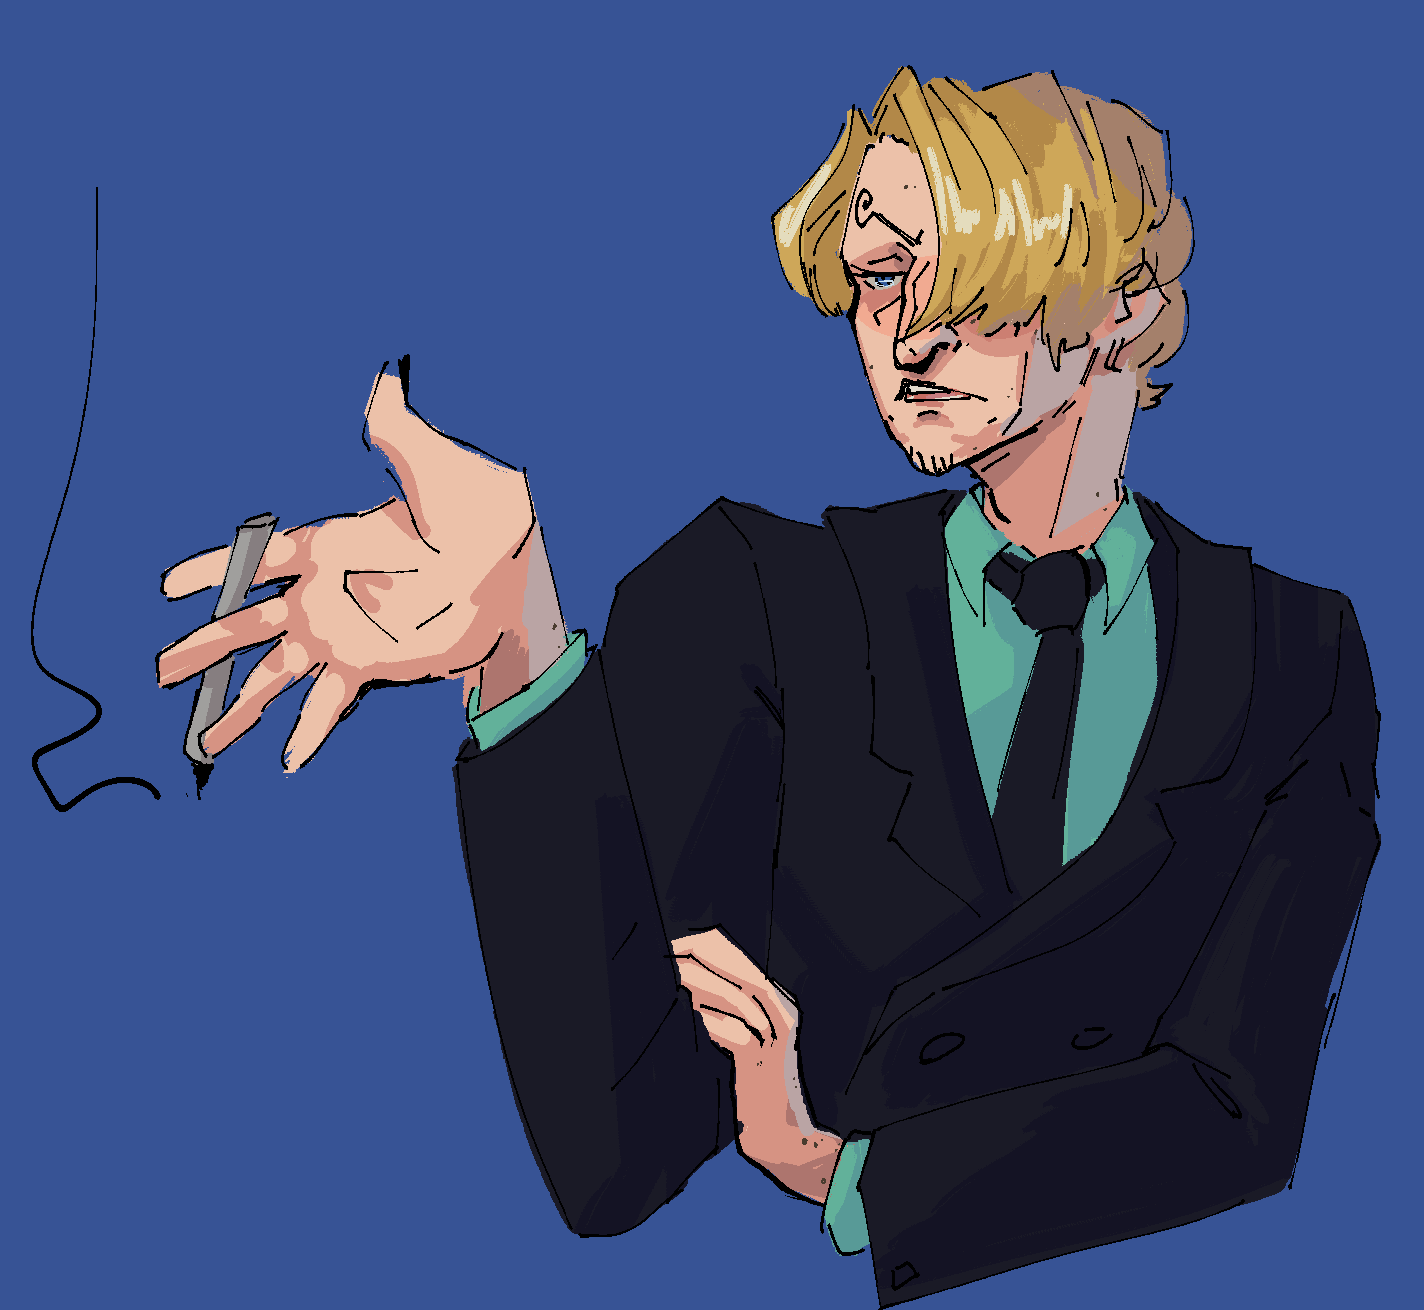 A drawing of Sanji One Piece from about the waist up. He is talking to something to the left, gesturing with one arm and crossing the other over his chest. He looks annoyed and is on a medium blue background.